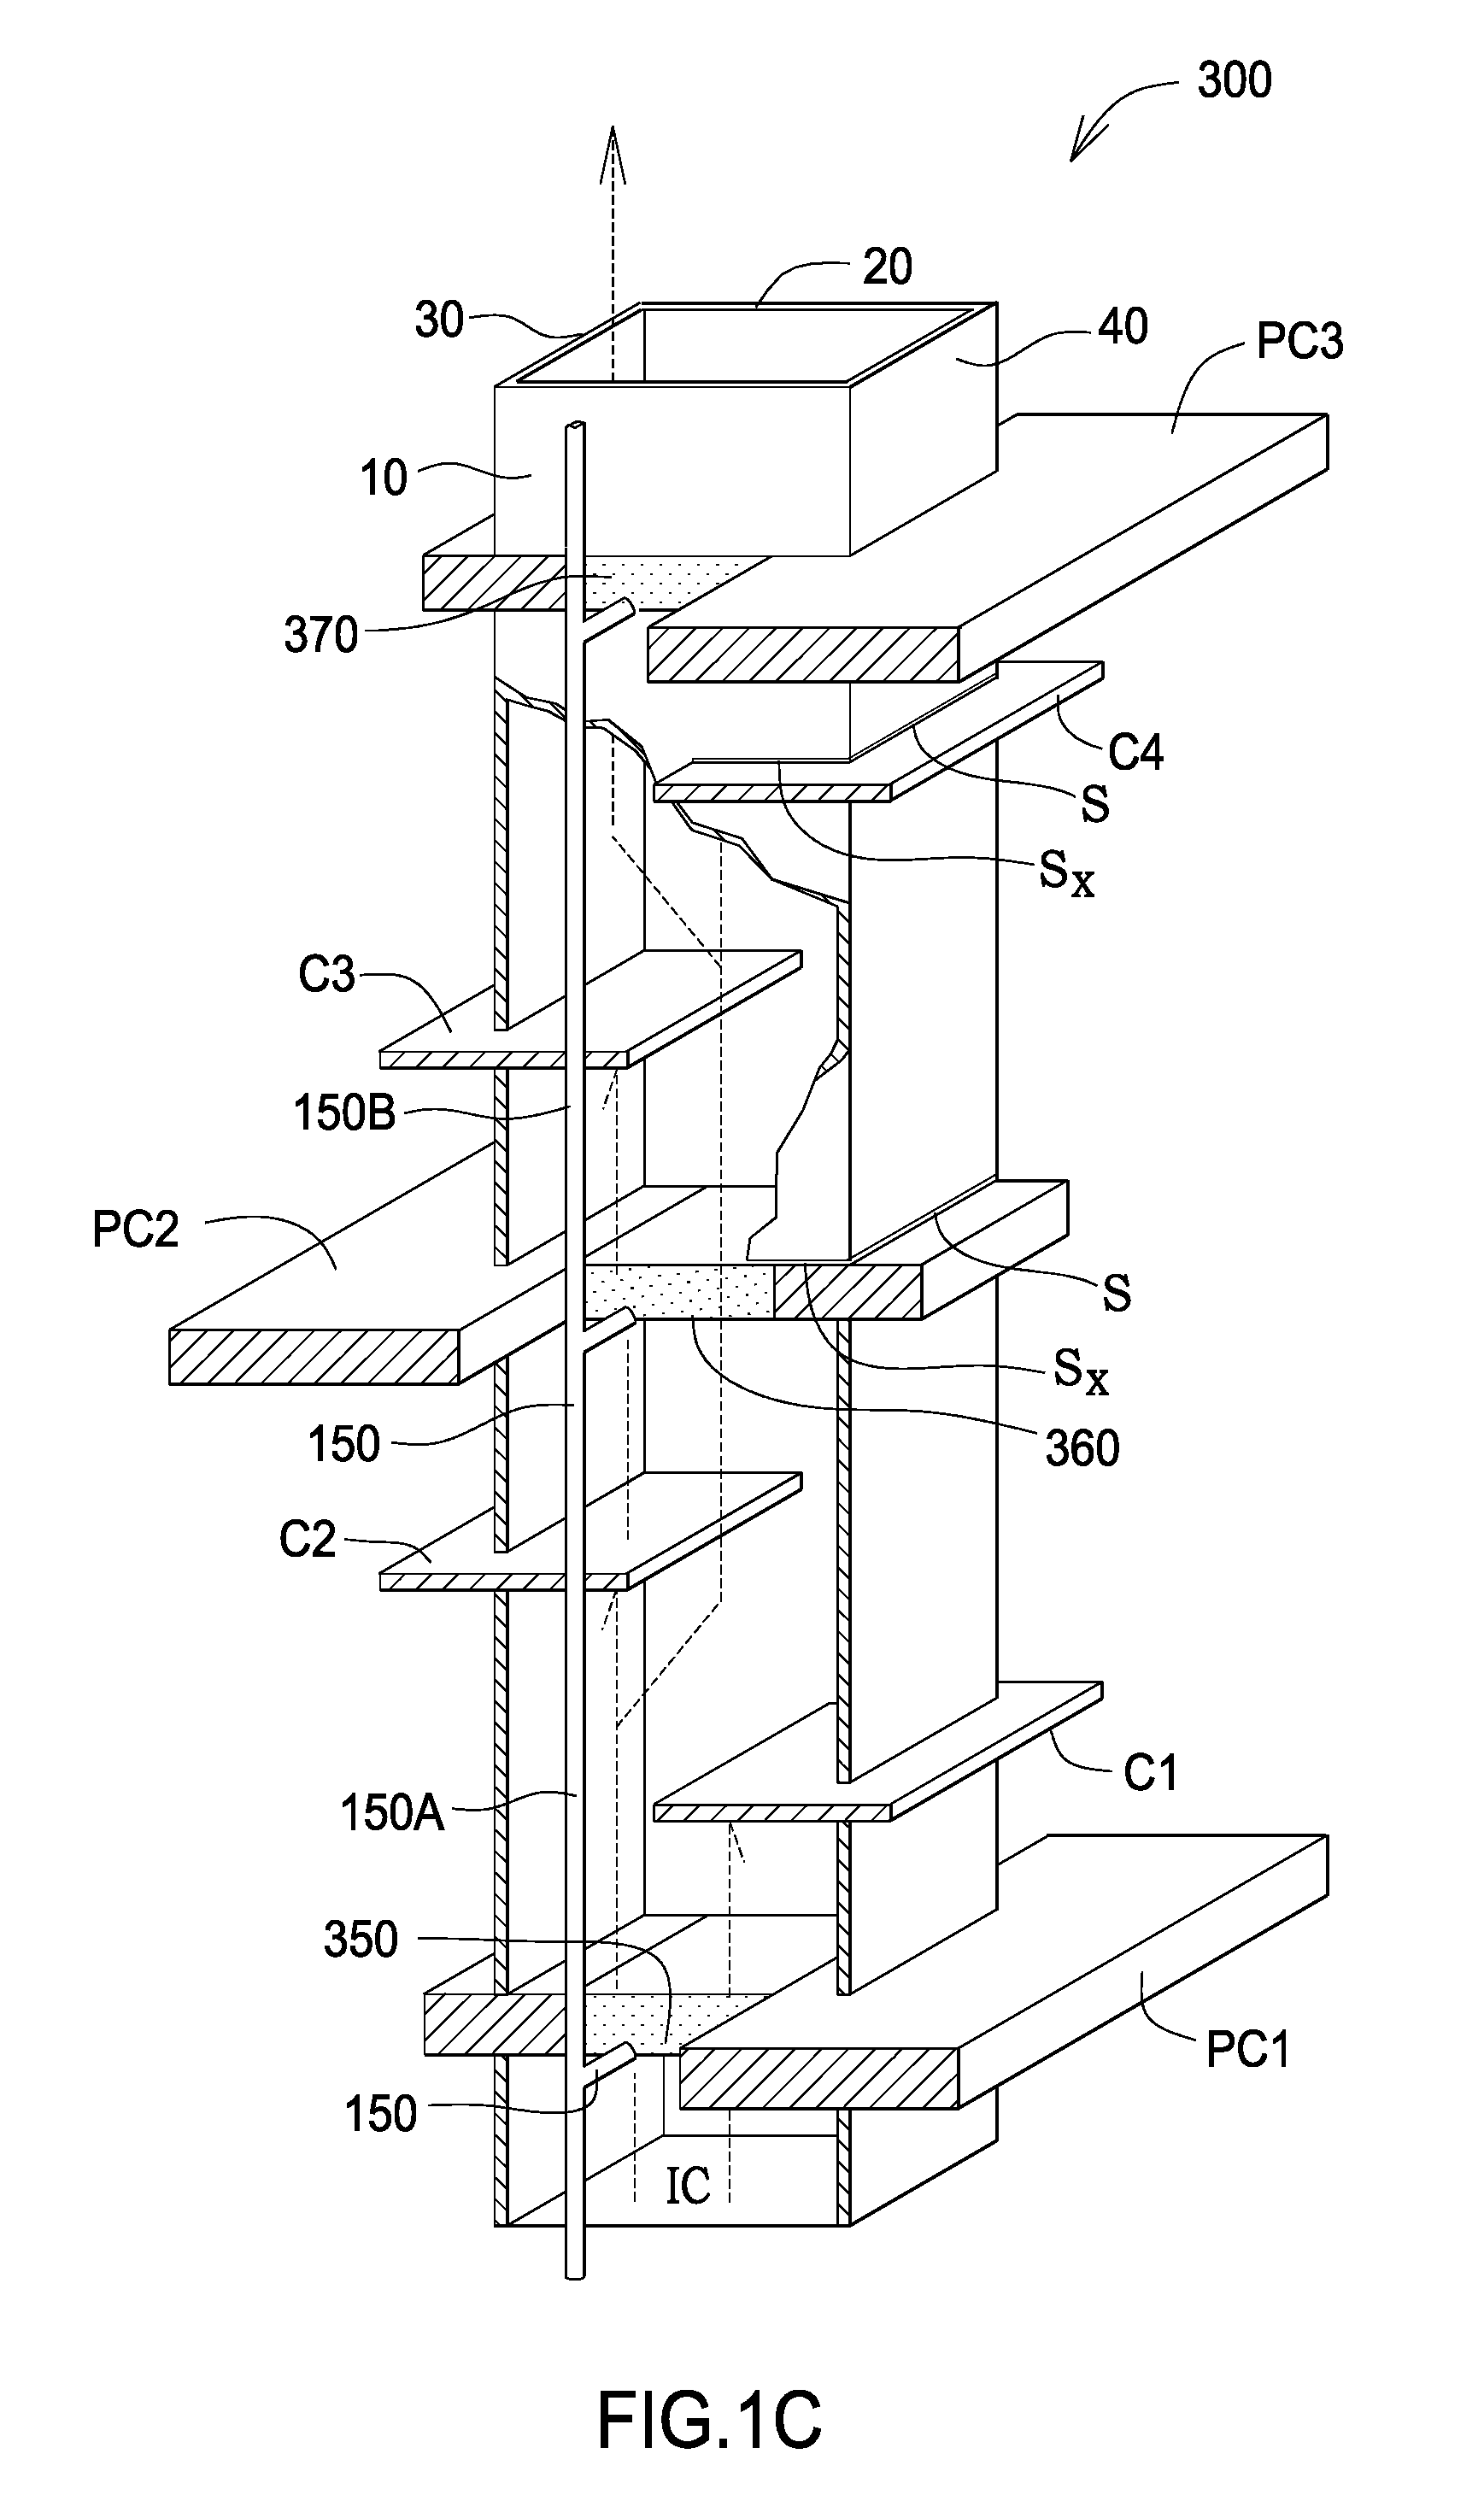 Method and Apparatus to Effect Heat Transfer